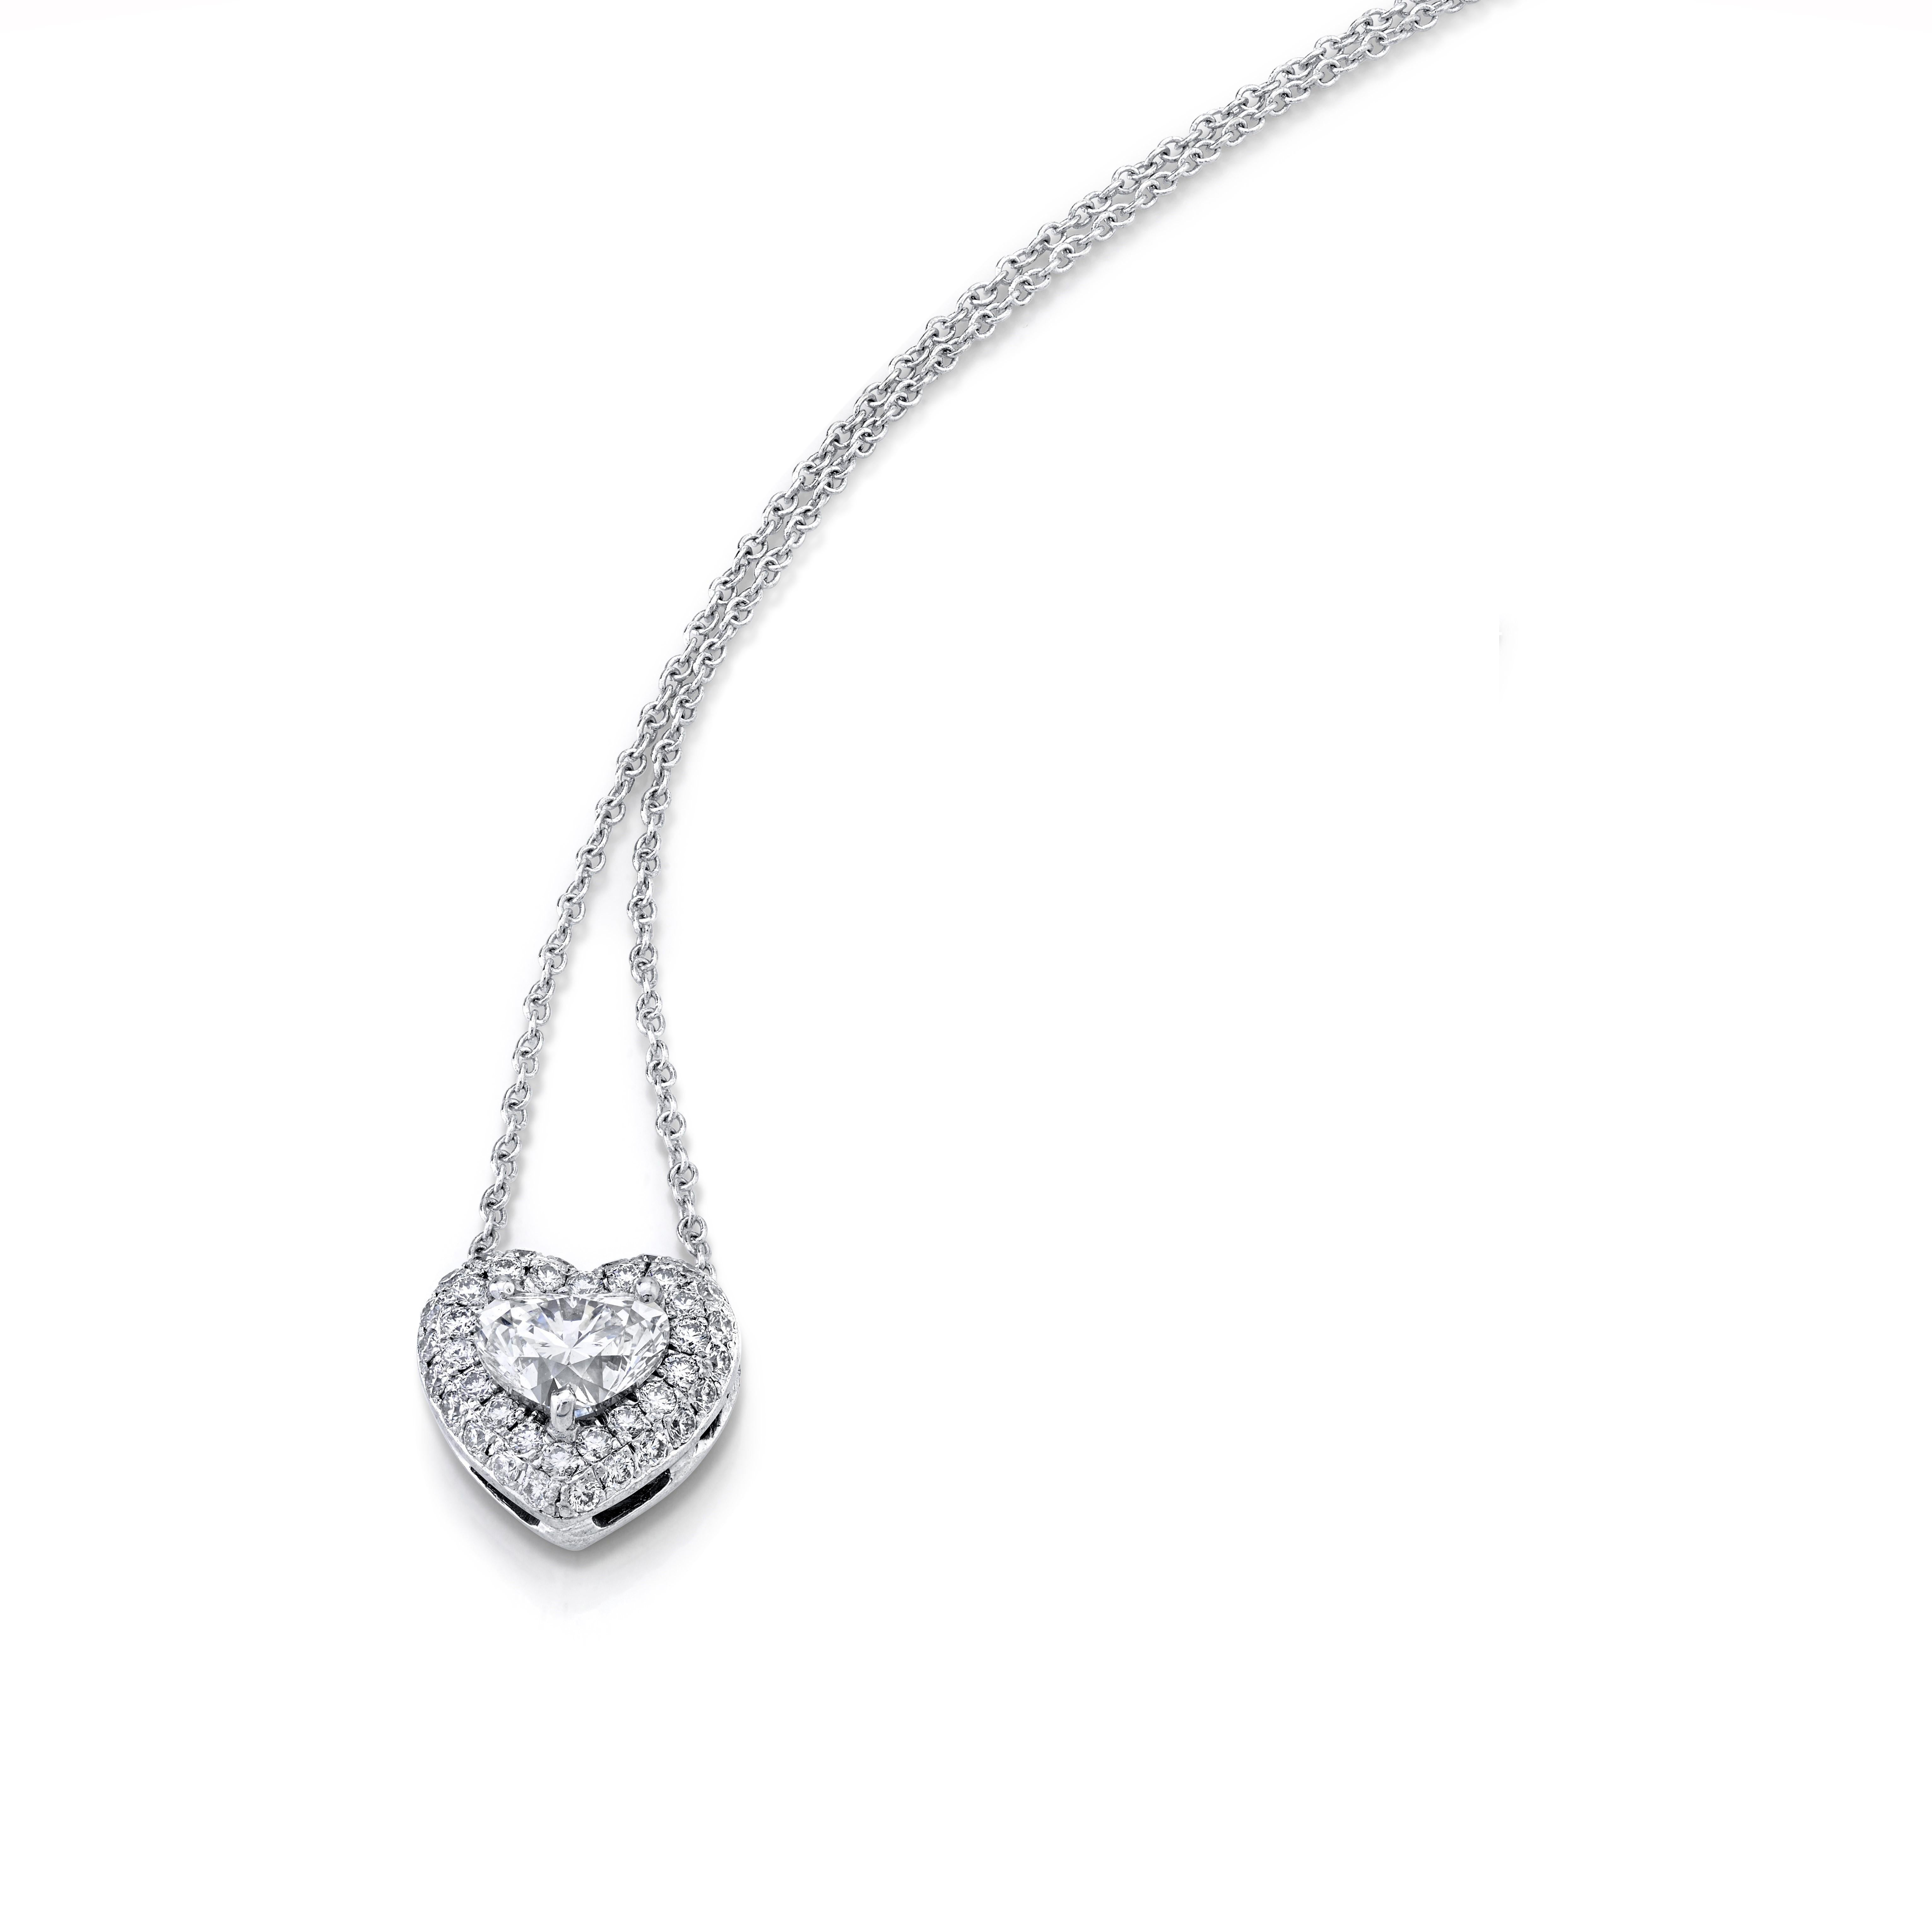 GIA CERTIFIED DIAMOND HEART SHAPE PENDANT  SET IN 18KWG

Heart Shape Diamond 0.90 carat. 

F Color VSI Clarity

With GIA Certificate

Micro-pave round Diamonds 0.45 carats

D/E Color VVS/VS Clarity

Total Weight 1.35 carats

Set in 18KWG. With 16